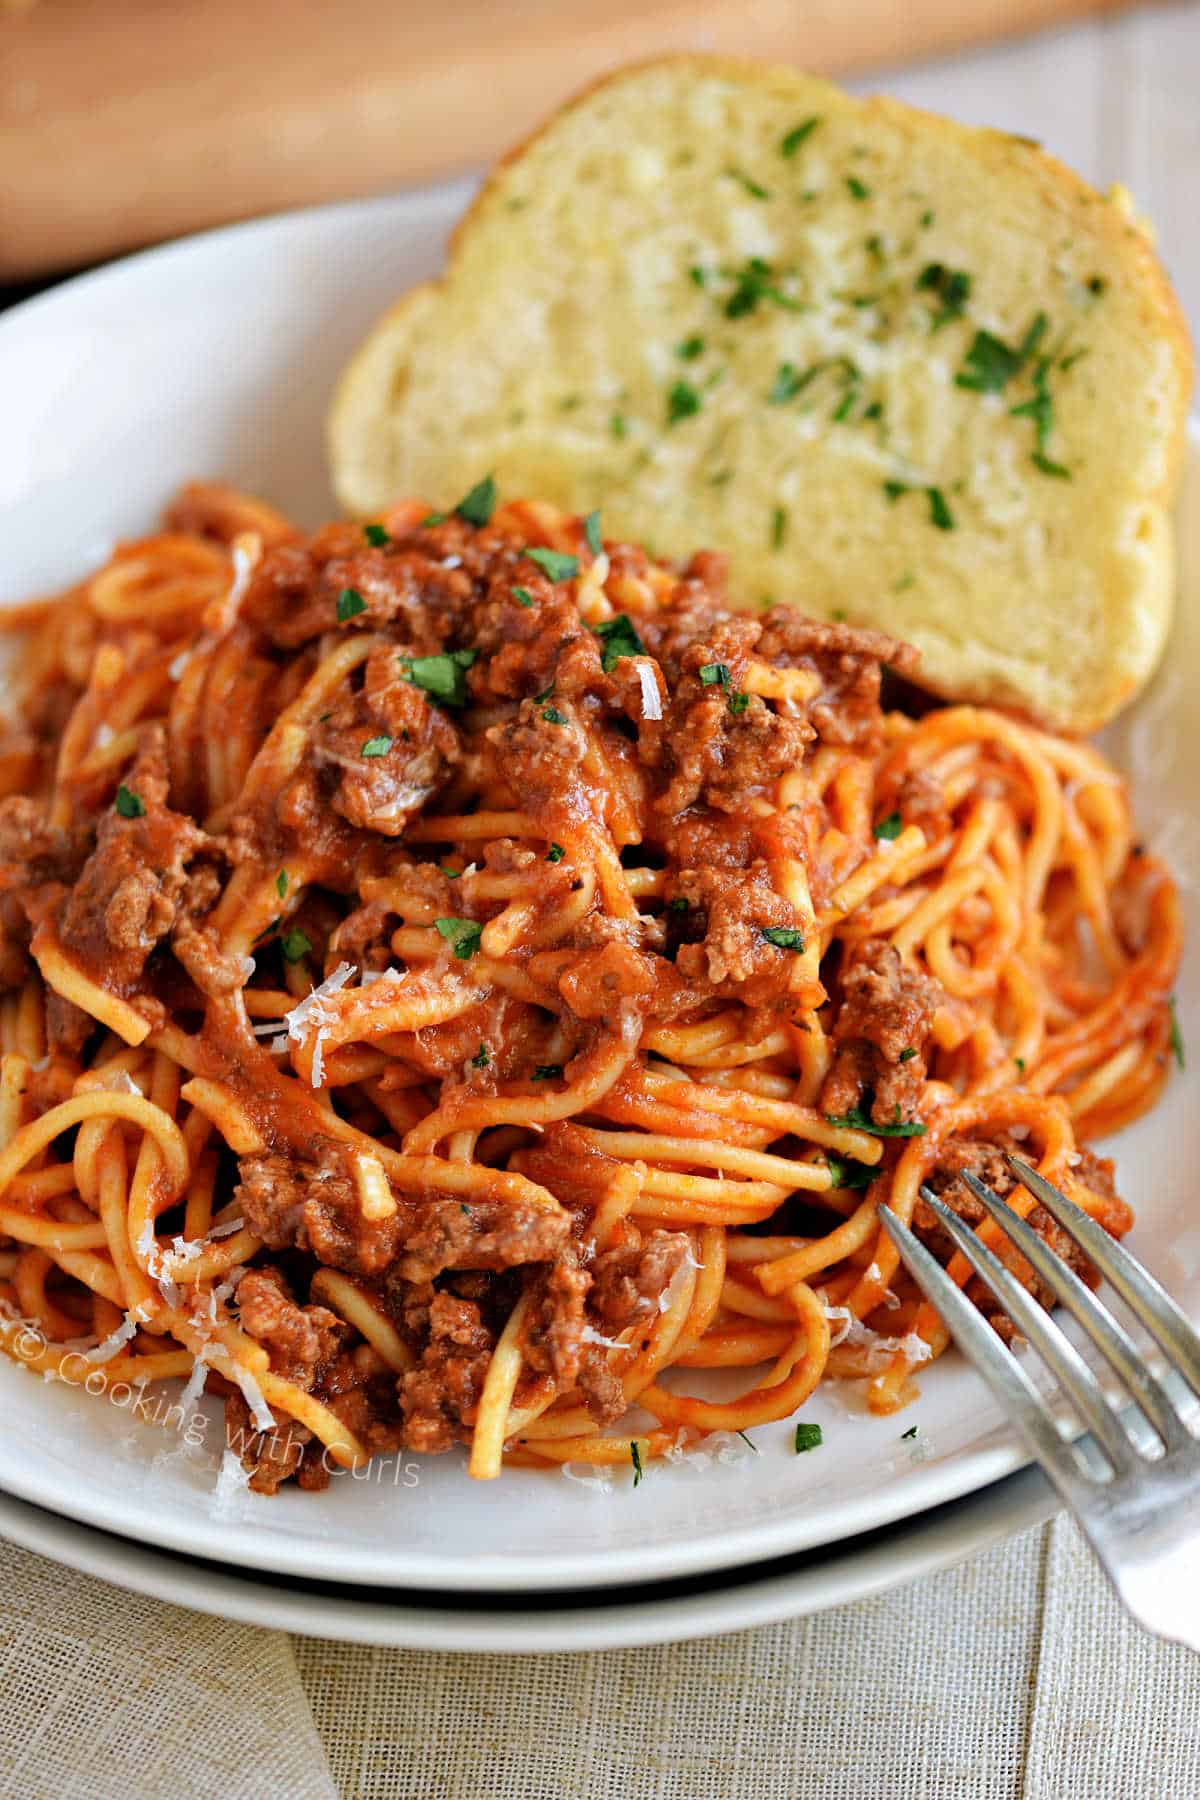 Spaghetti with meat sauce on a white plate with garlic bread on the side.